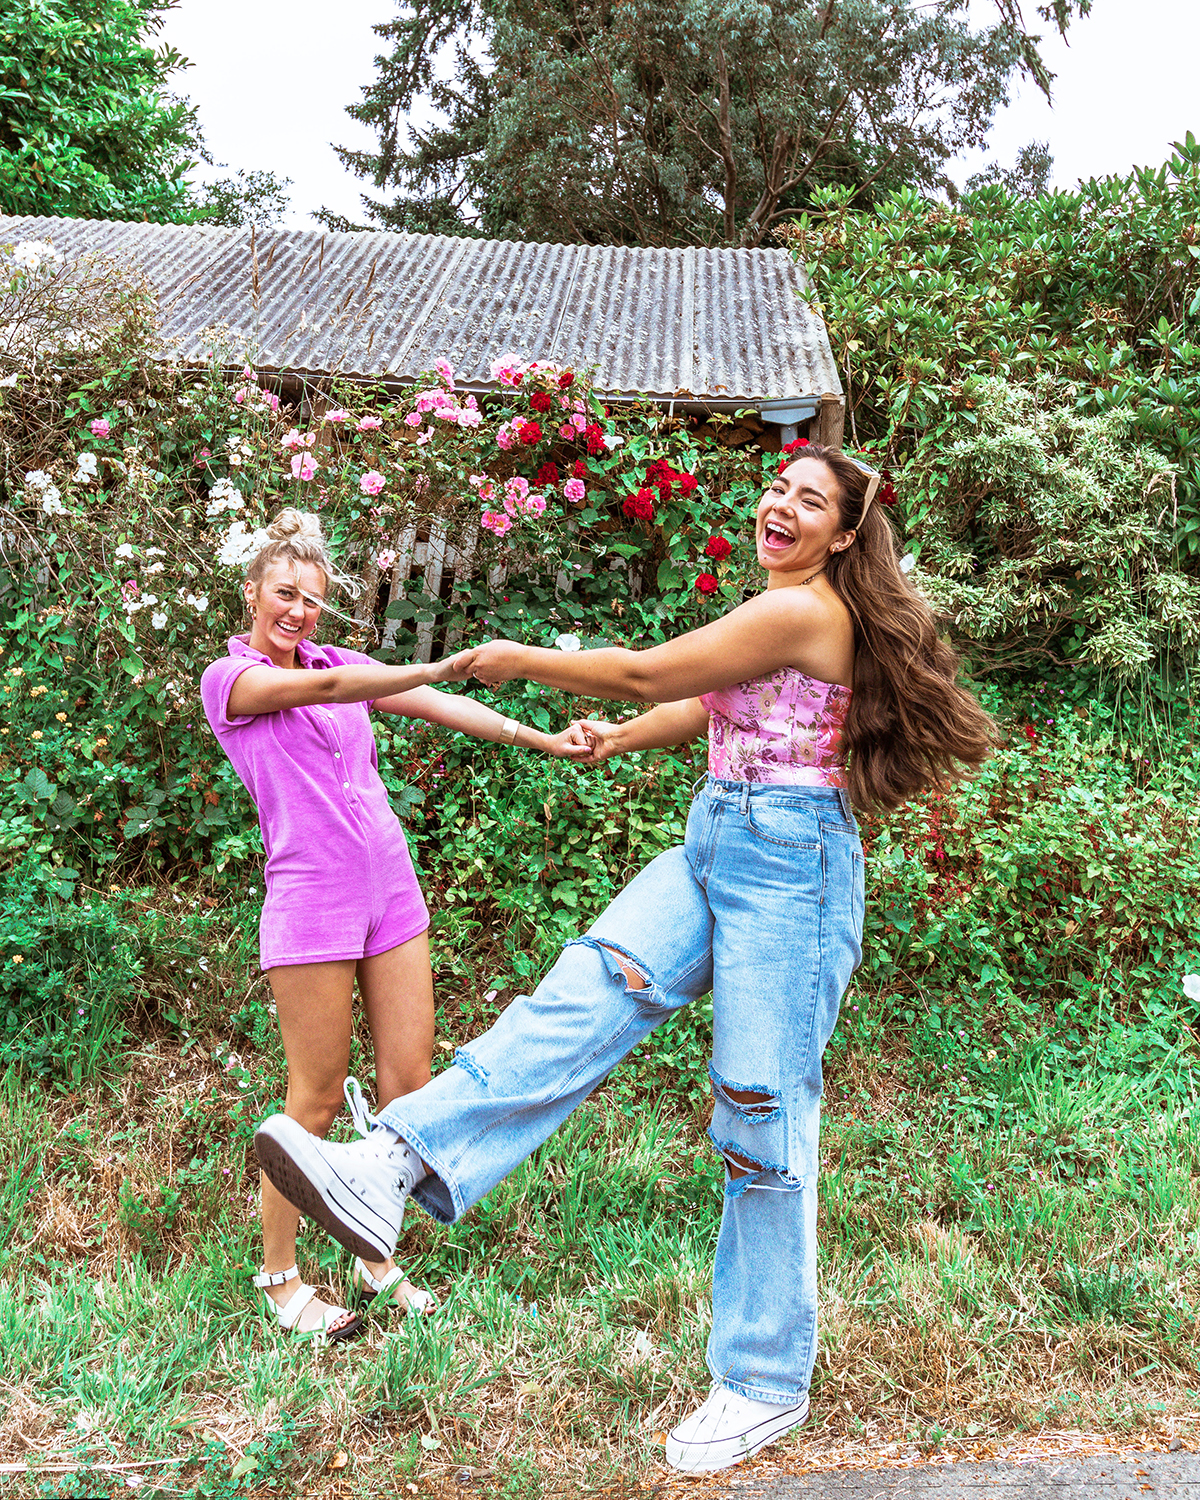 two women hold both hands and look like they are spinning and laughing wearing summer outfits in front of green shrubbery and blooming Oregon flowers. The brunette's hair flies behind her